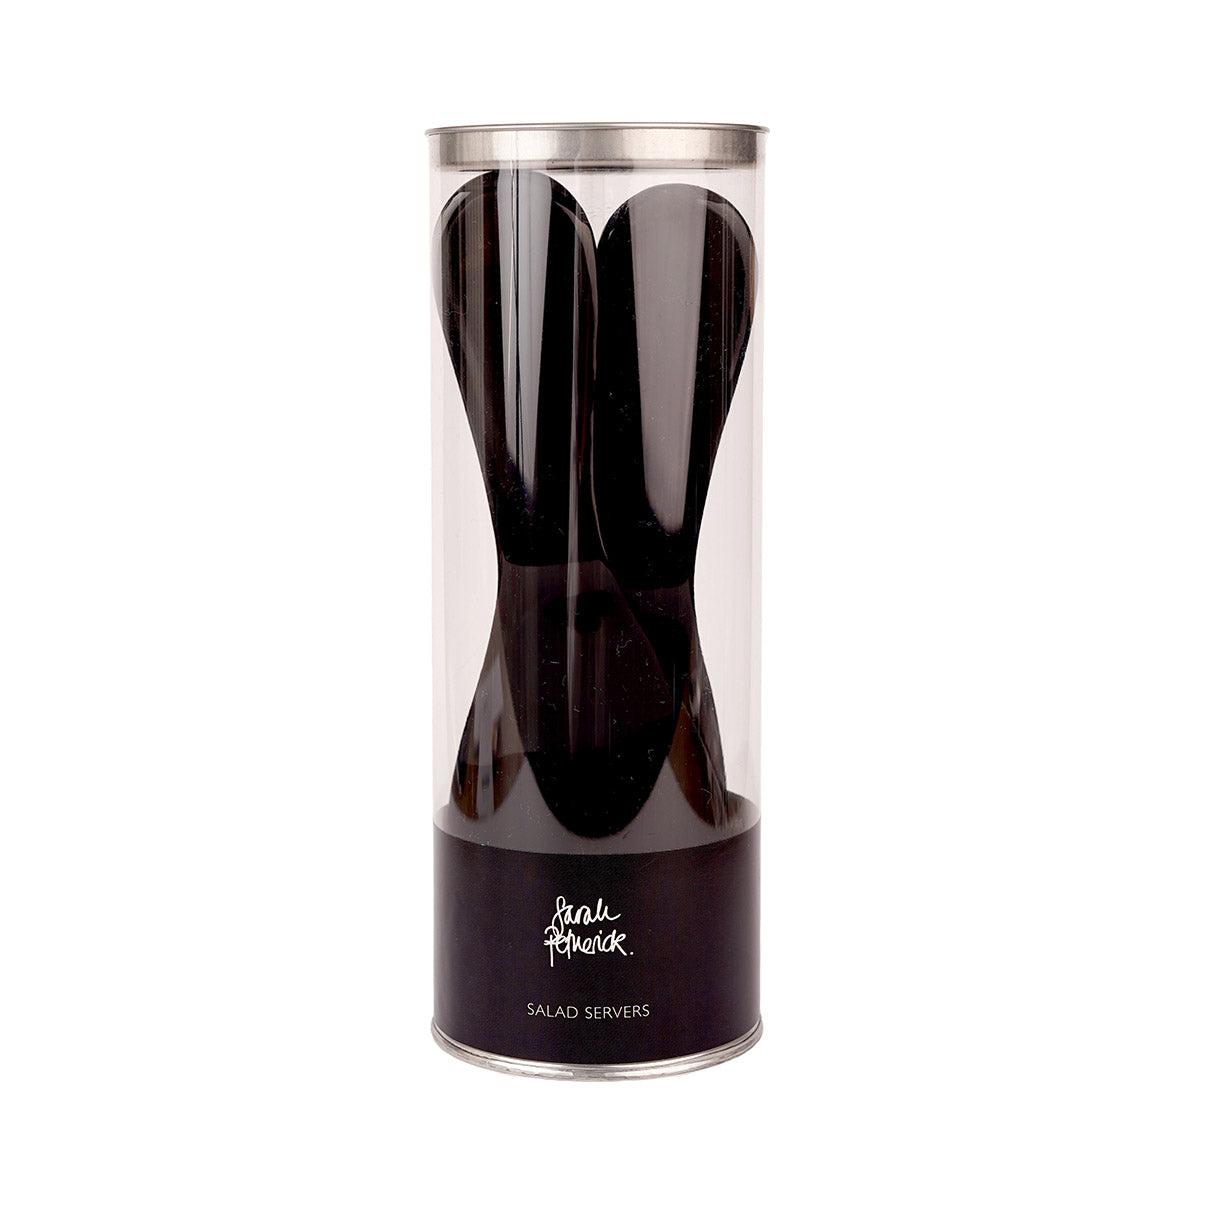 Pair of black horn salad servers in a clear tube